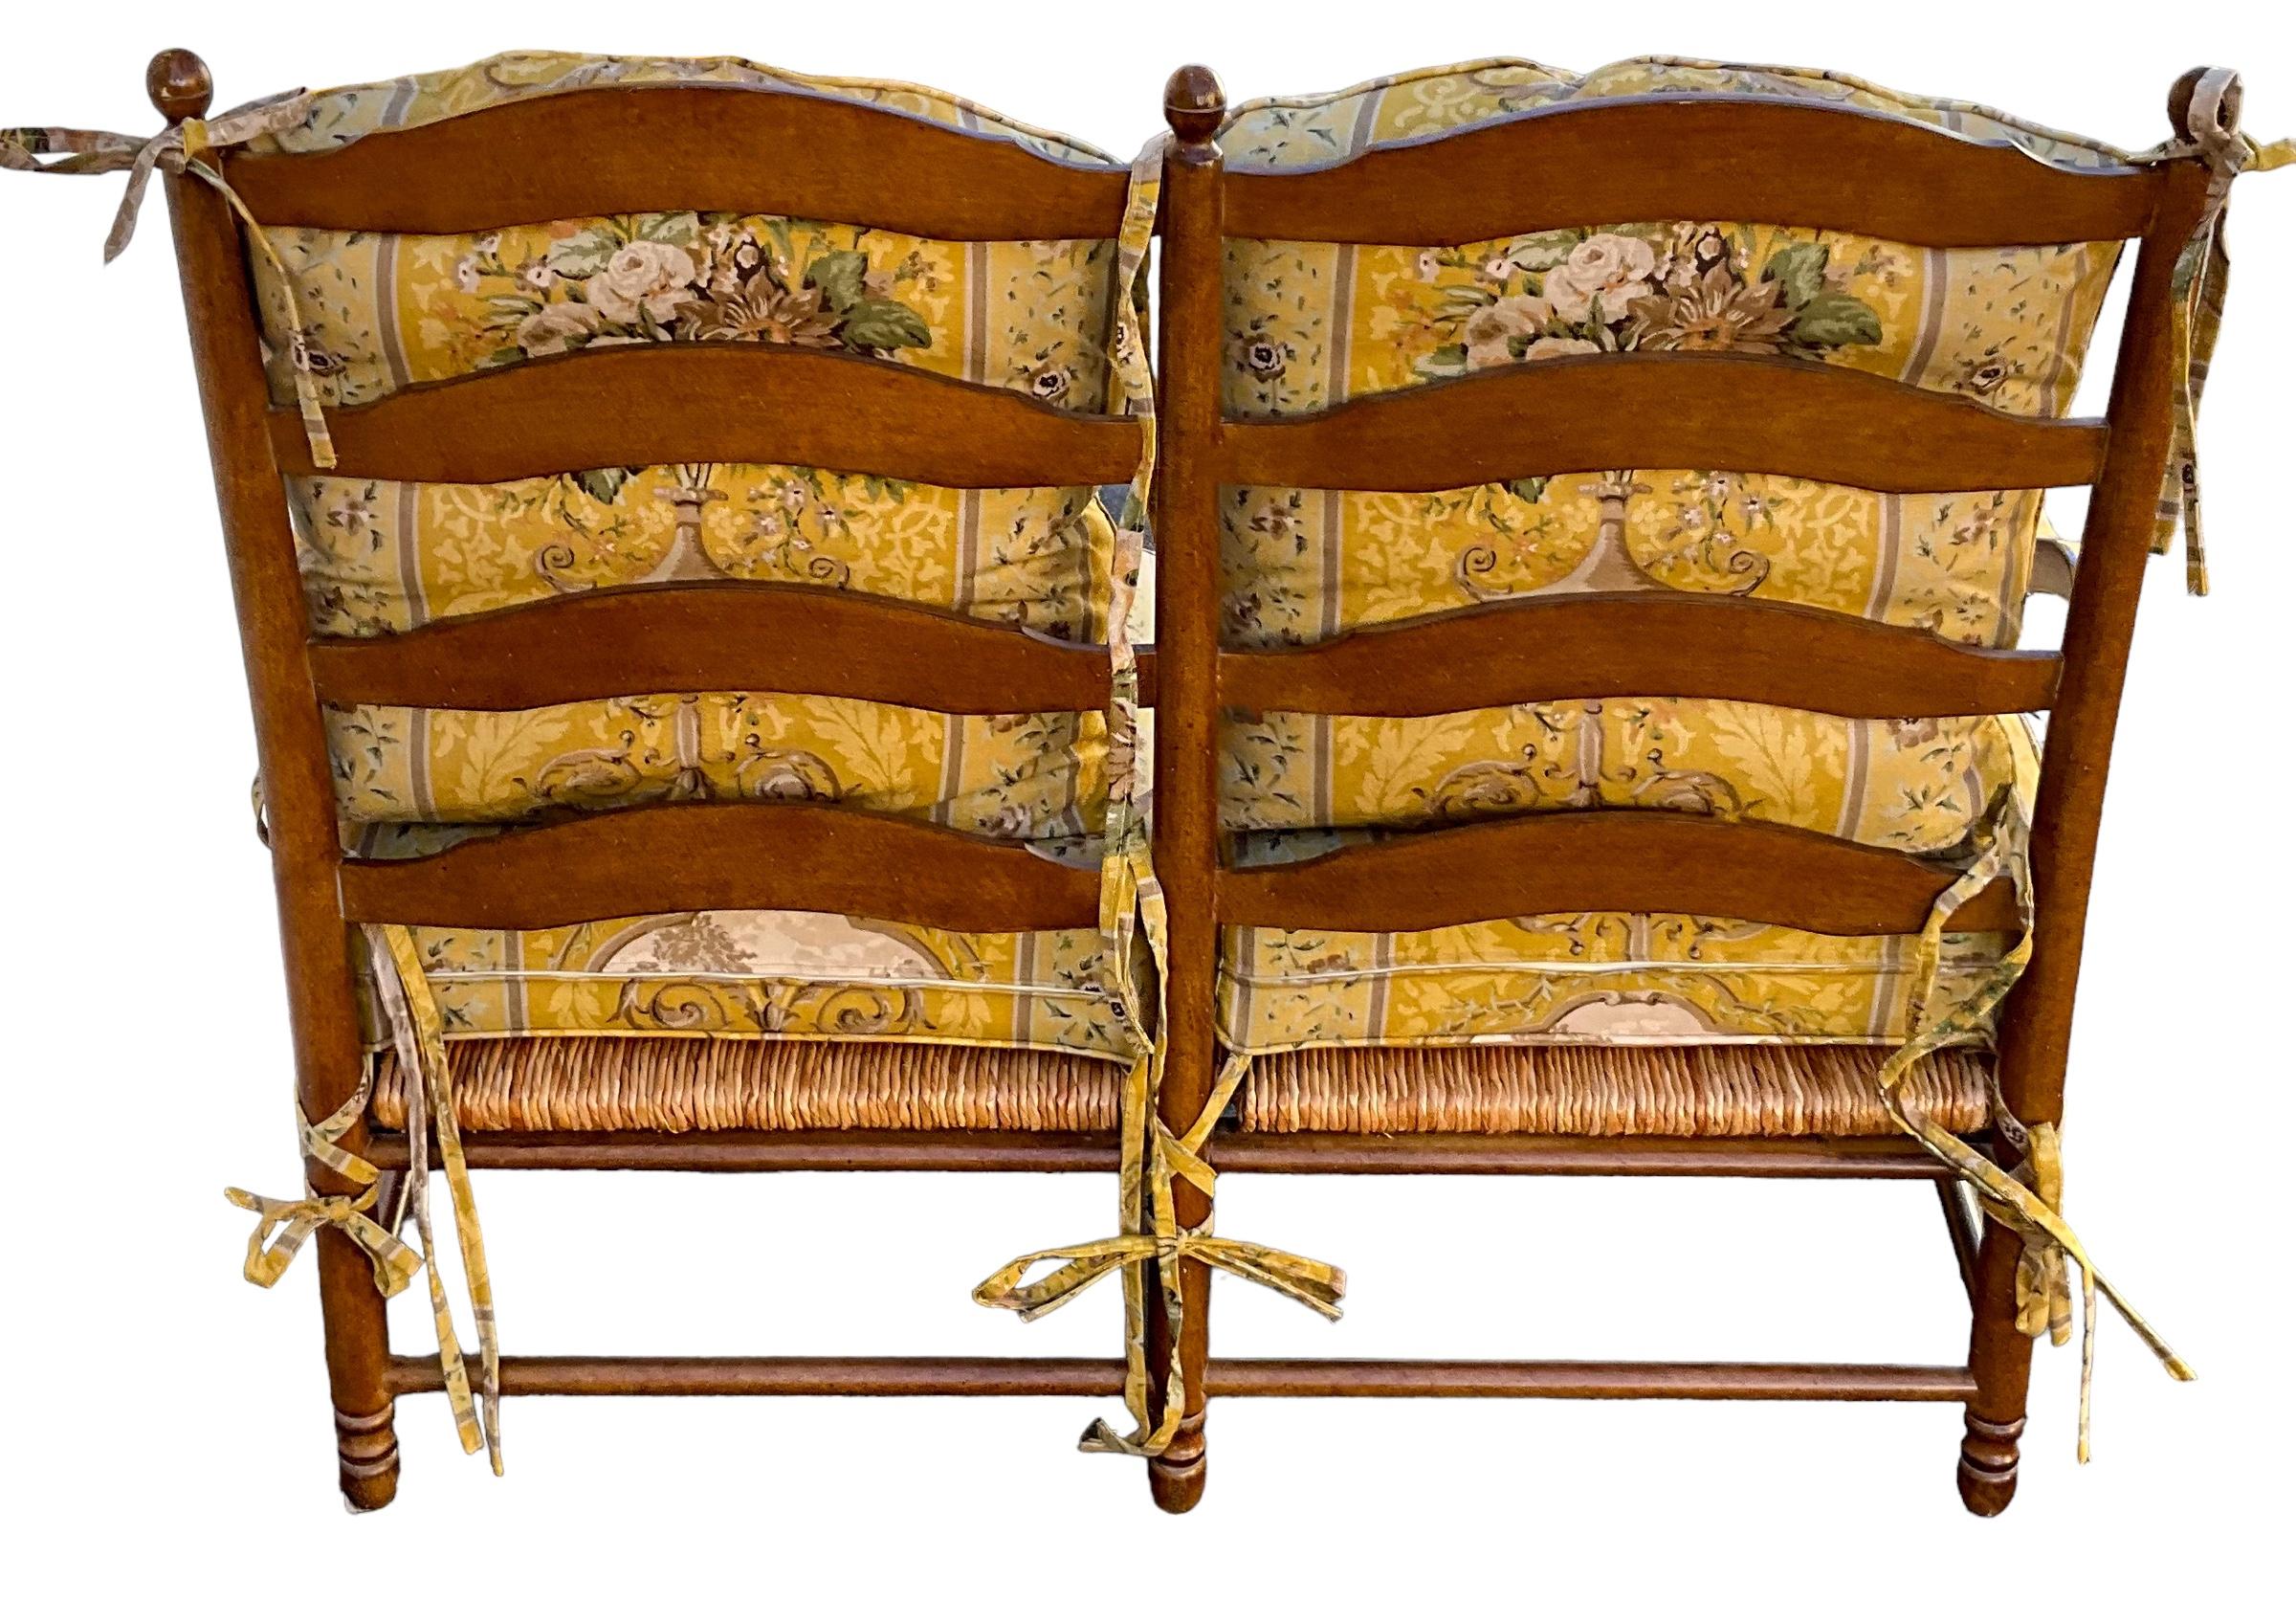 French Provincial 20th-C. French Country Carved Maple Settee W/ Rush Seat Att. To Pierre Deux  For Sale